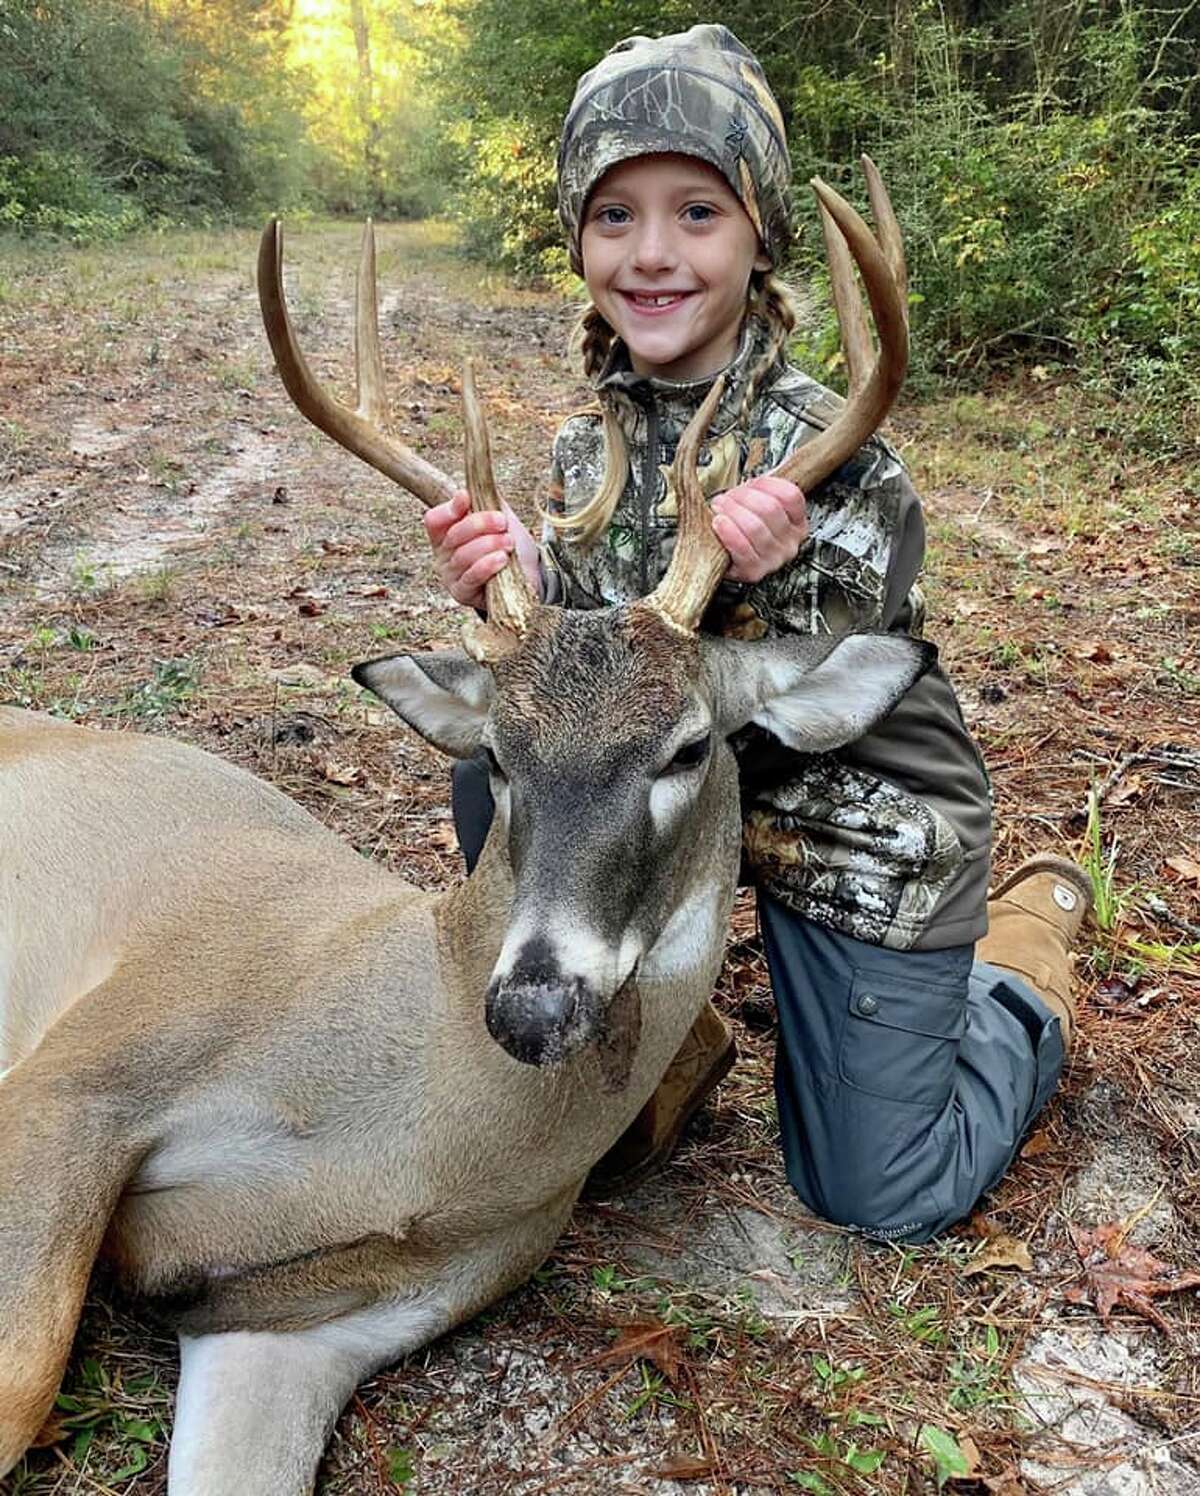 Houstonarea kids show off their hunting trophies from 2019 youth